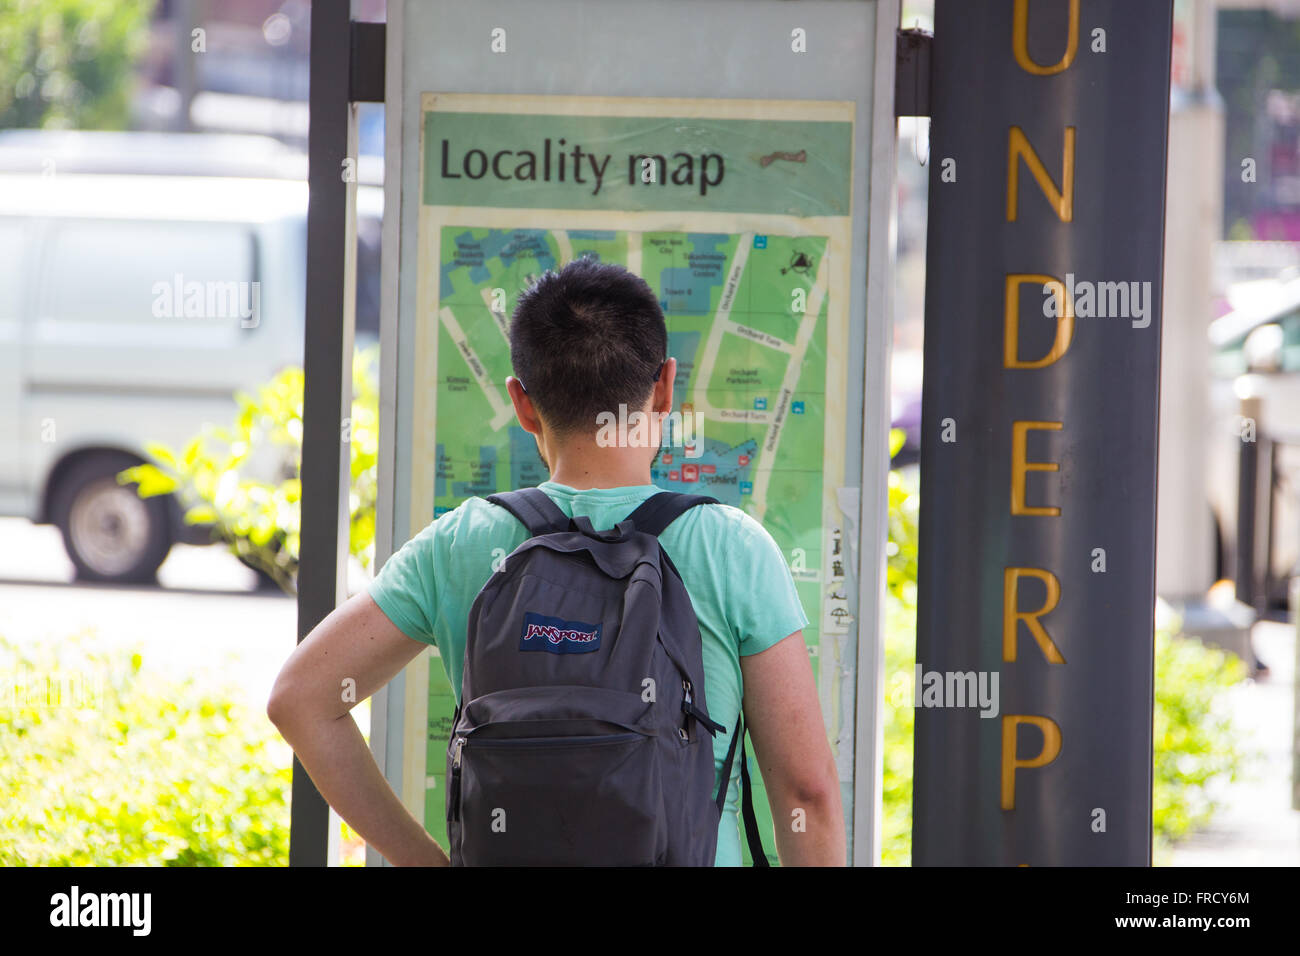 South Korean tourist looking at a Locality Map in Singapore Stock Photo